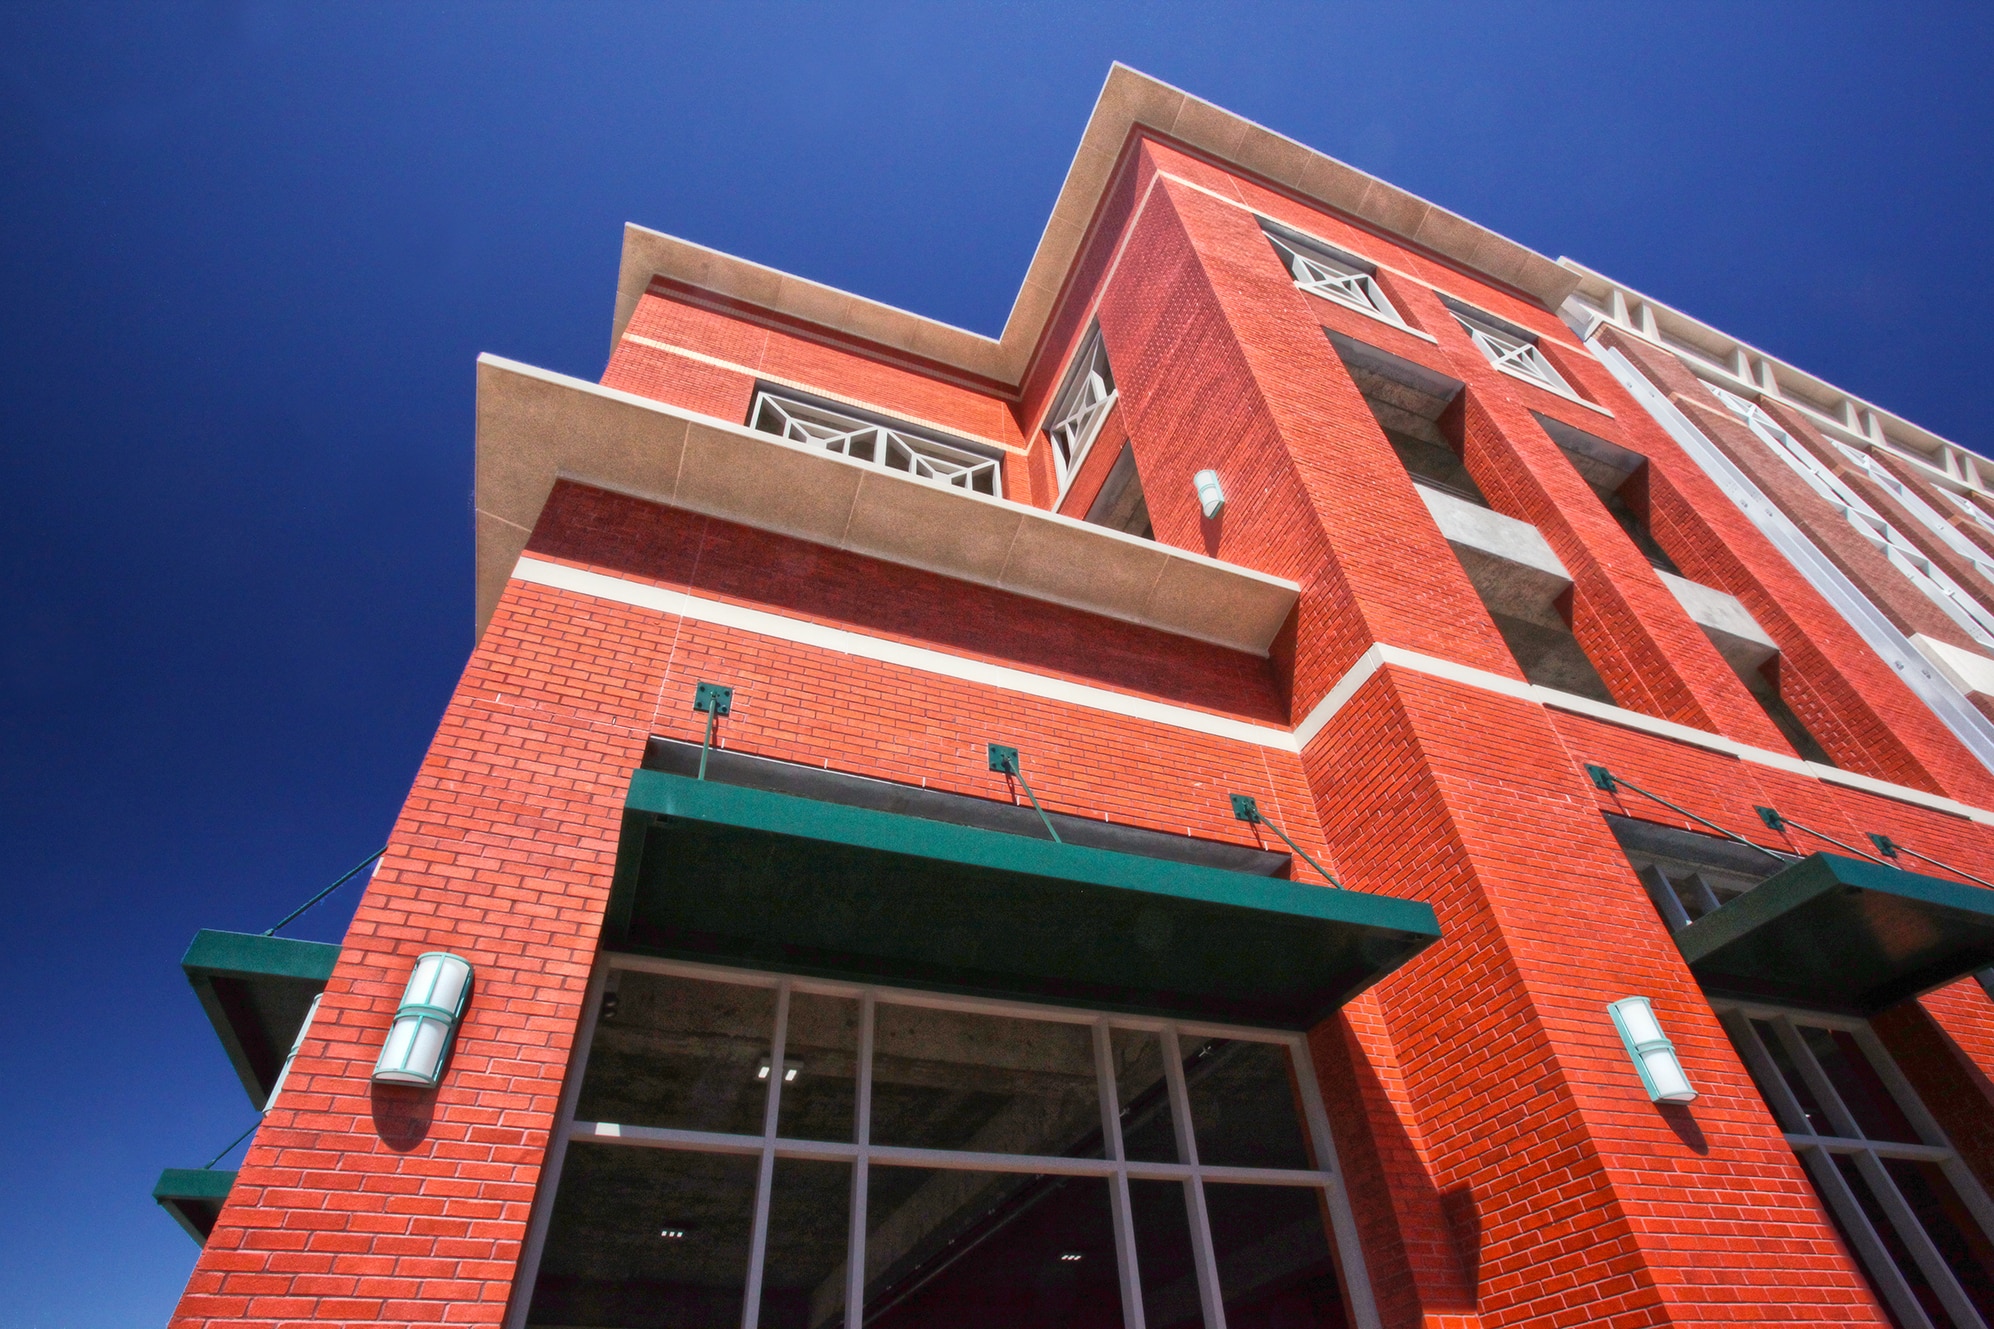 Kimley-Horn provided parking consulting services for the Franklin Street Parking Deck in Fayetteville, North Carolina.